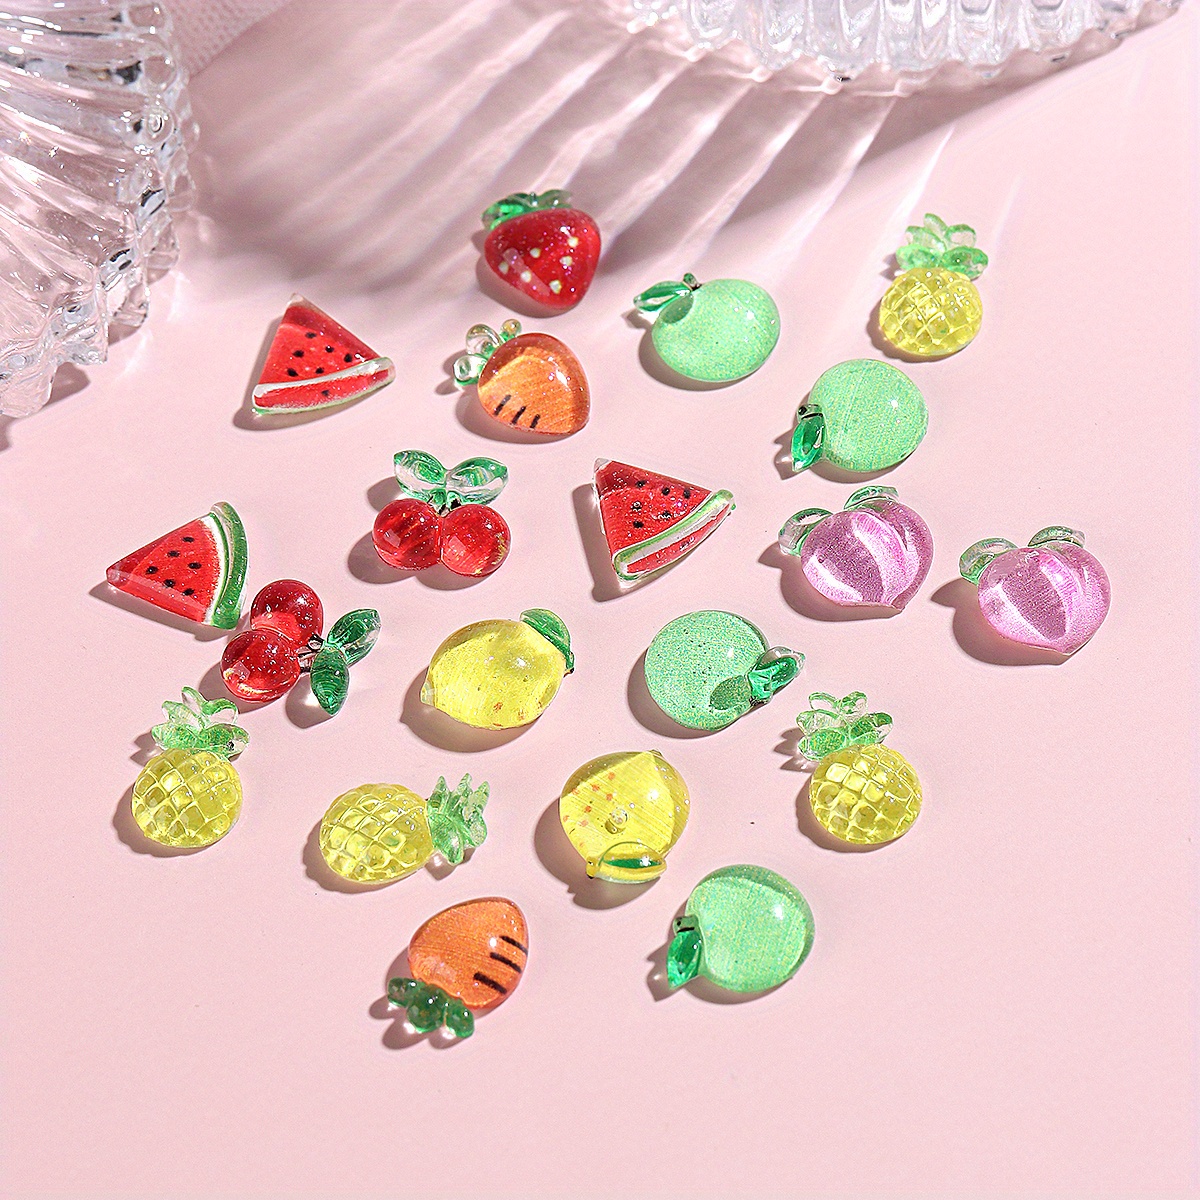 BAIYIYI 50PCS 3D Nail Charms Strawberry Fruit Resin Nail Art Charms Cute  Strawberry Design Flatback Slime Resin Charms for Acrylic Nails DIY Craft